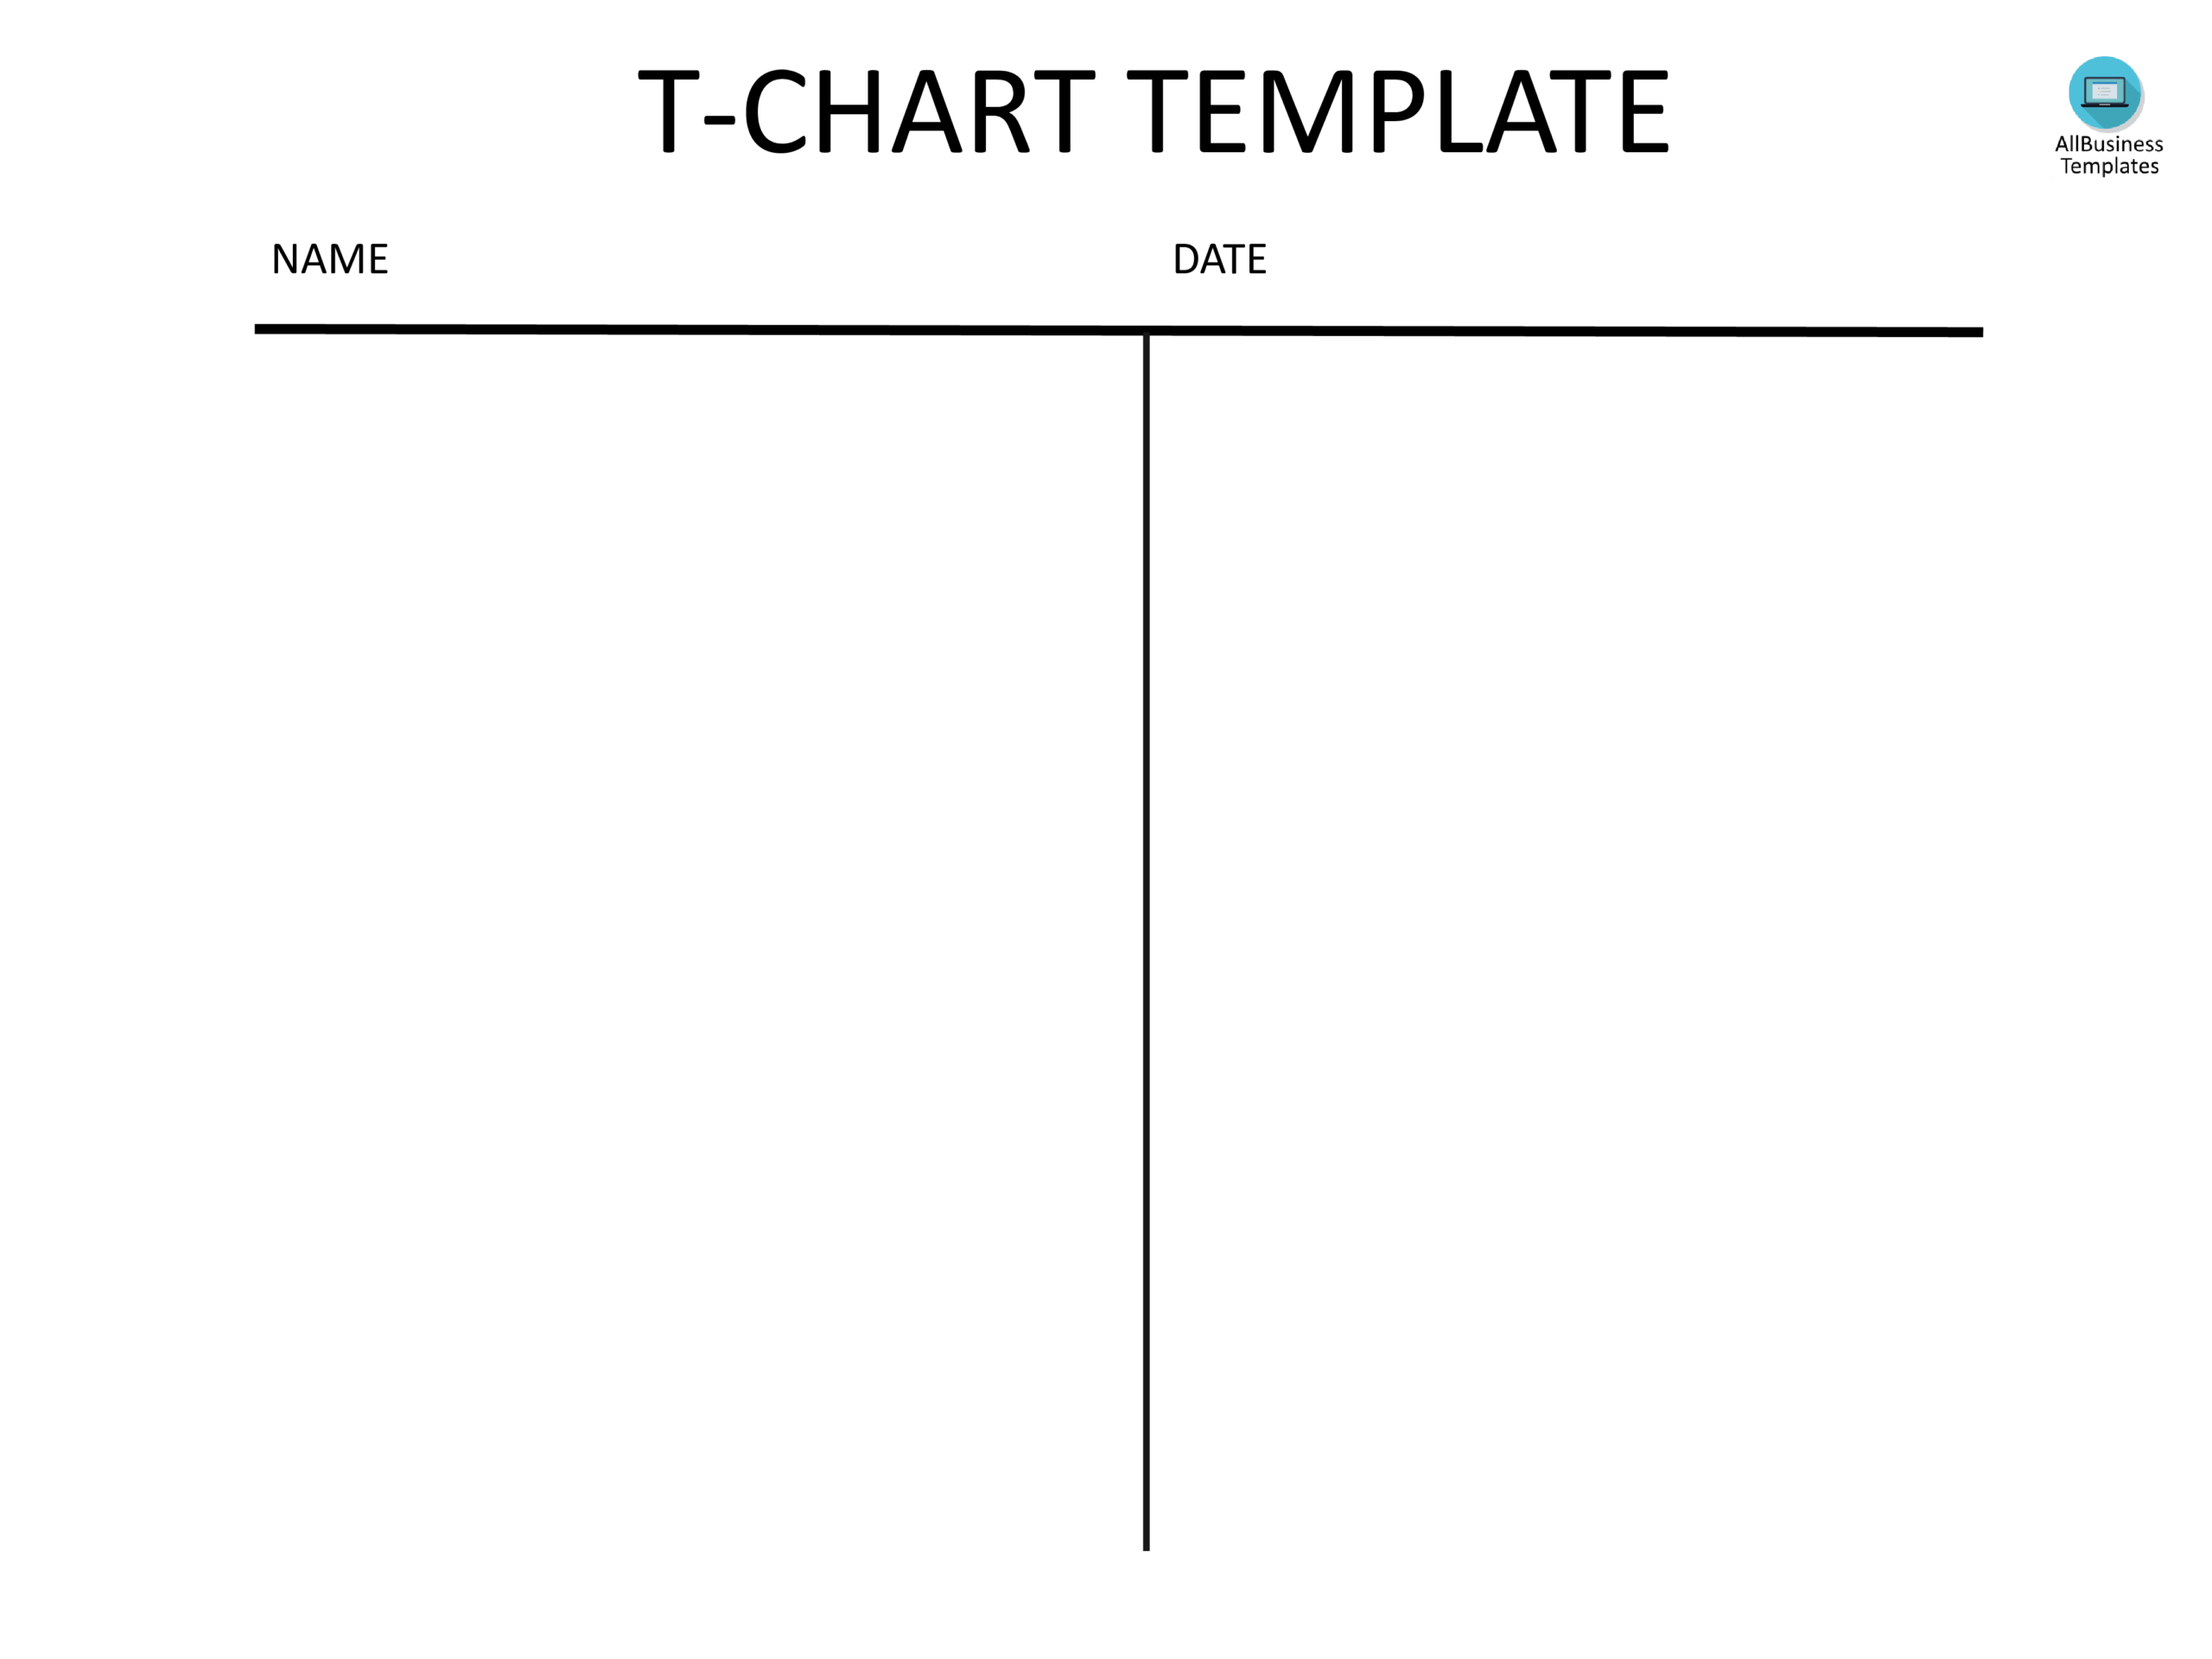 T Chart Template Pdf | Templates At Allbusinesstemplates Regarding T Chart Template For Word